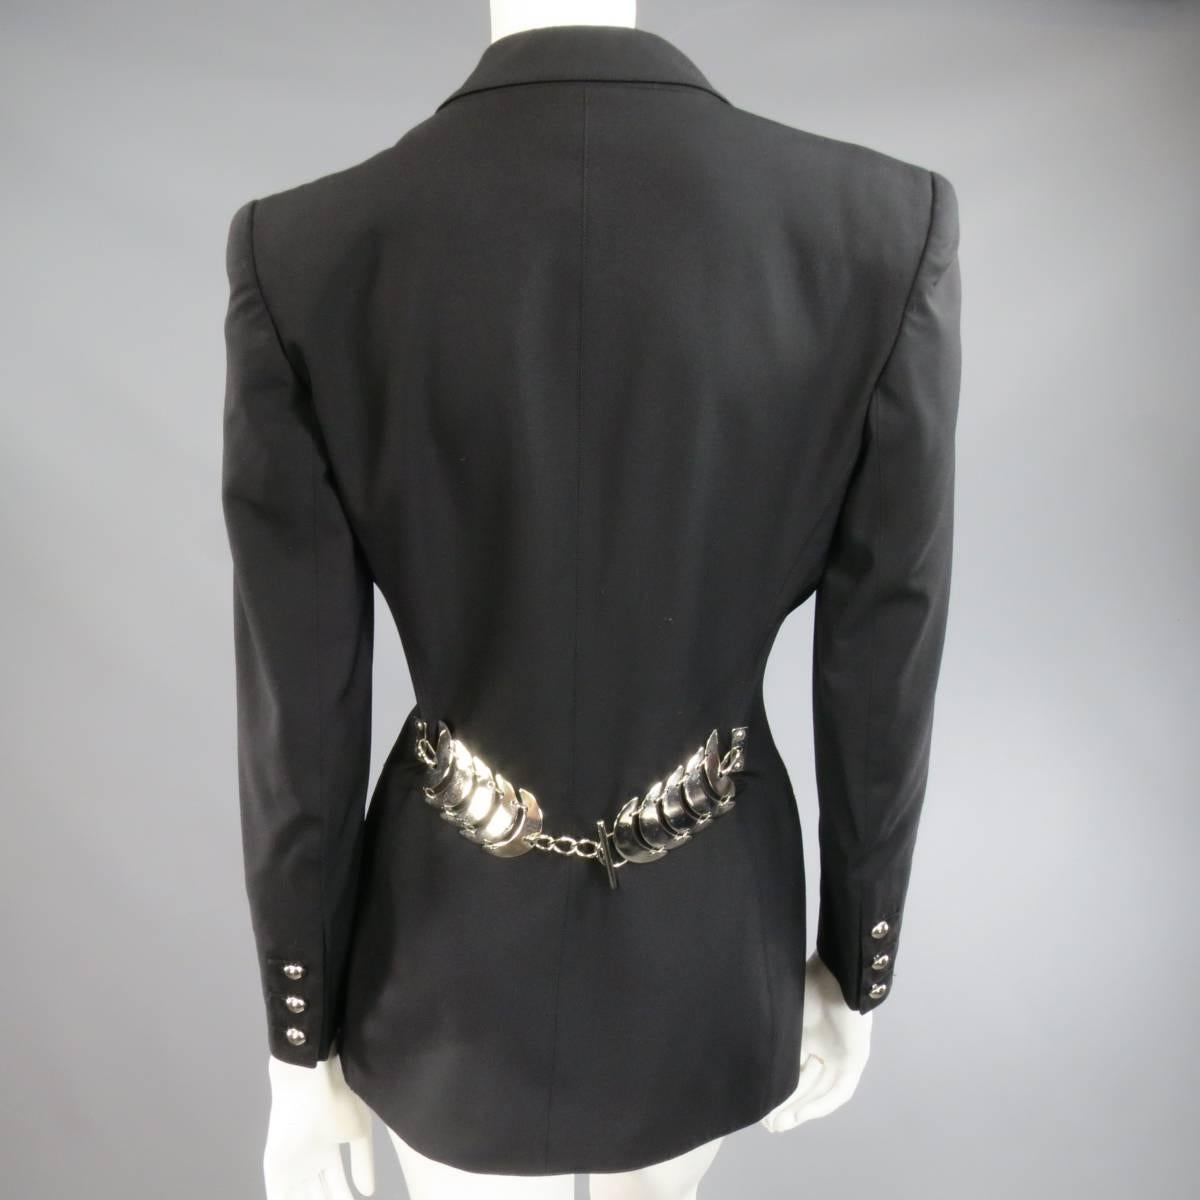 This fabulous vintage CLAUDE MONTANA jacket comes in a light weight black wool and features a peak lapel, Strong padded shoulder, single shiny silver tone button, double faux slit pockets, functional button sleeves, tailored hourglass silhouette,